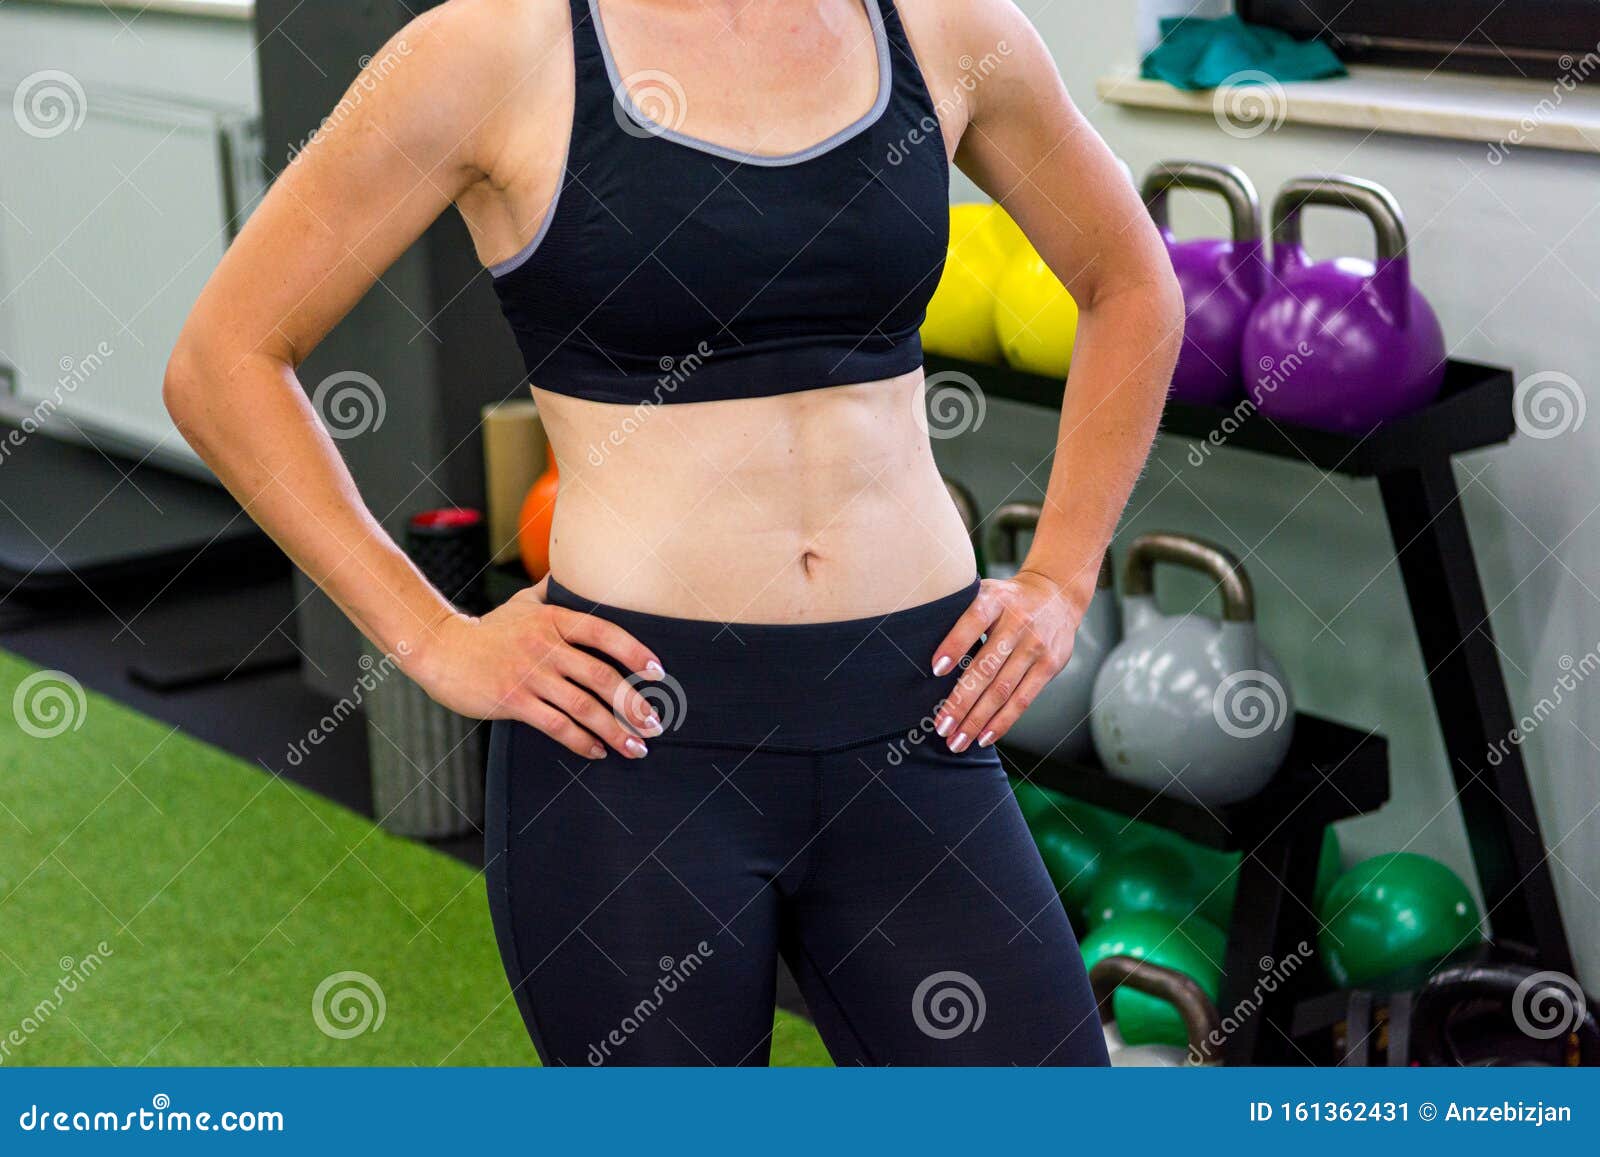 Detail Shot Of Female Trainer Posing In Local Gym Shoving Her